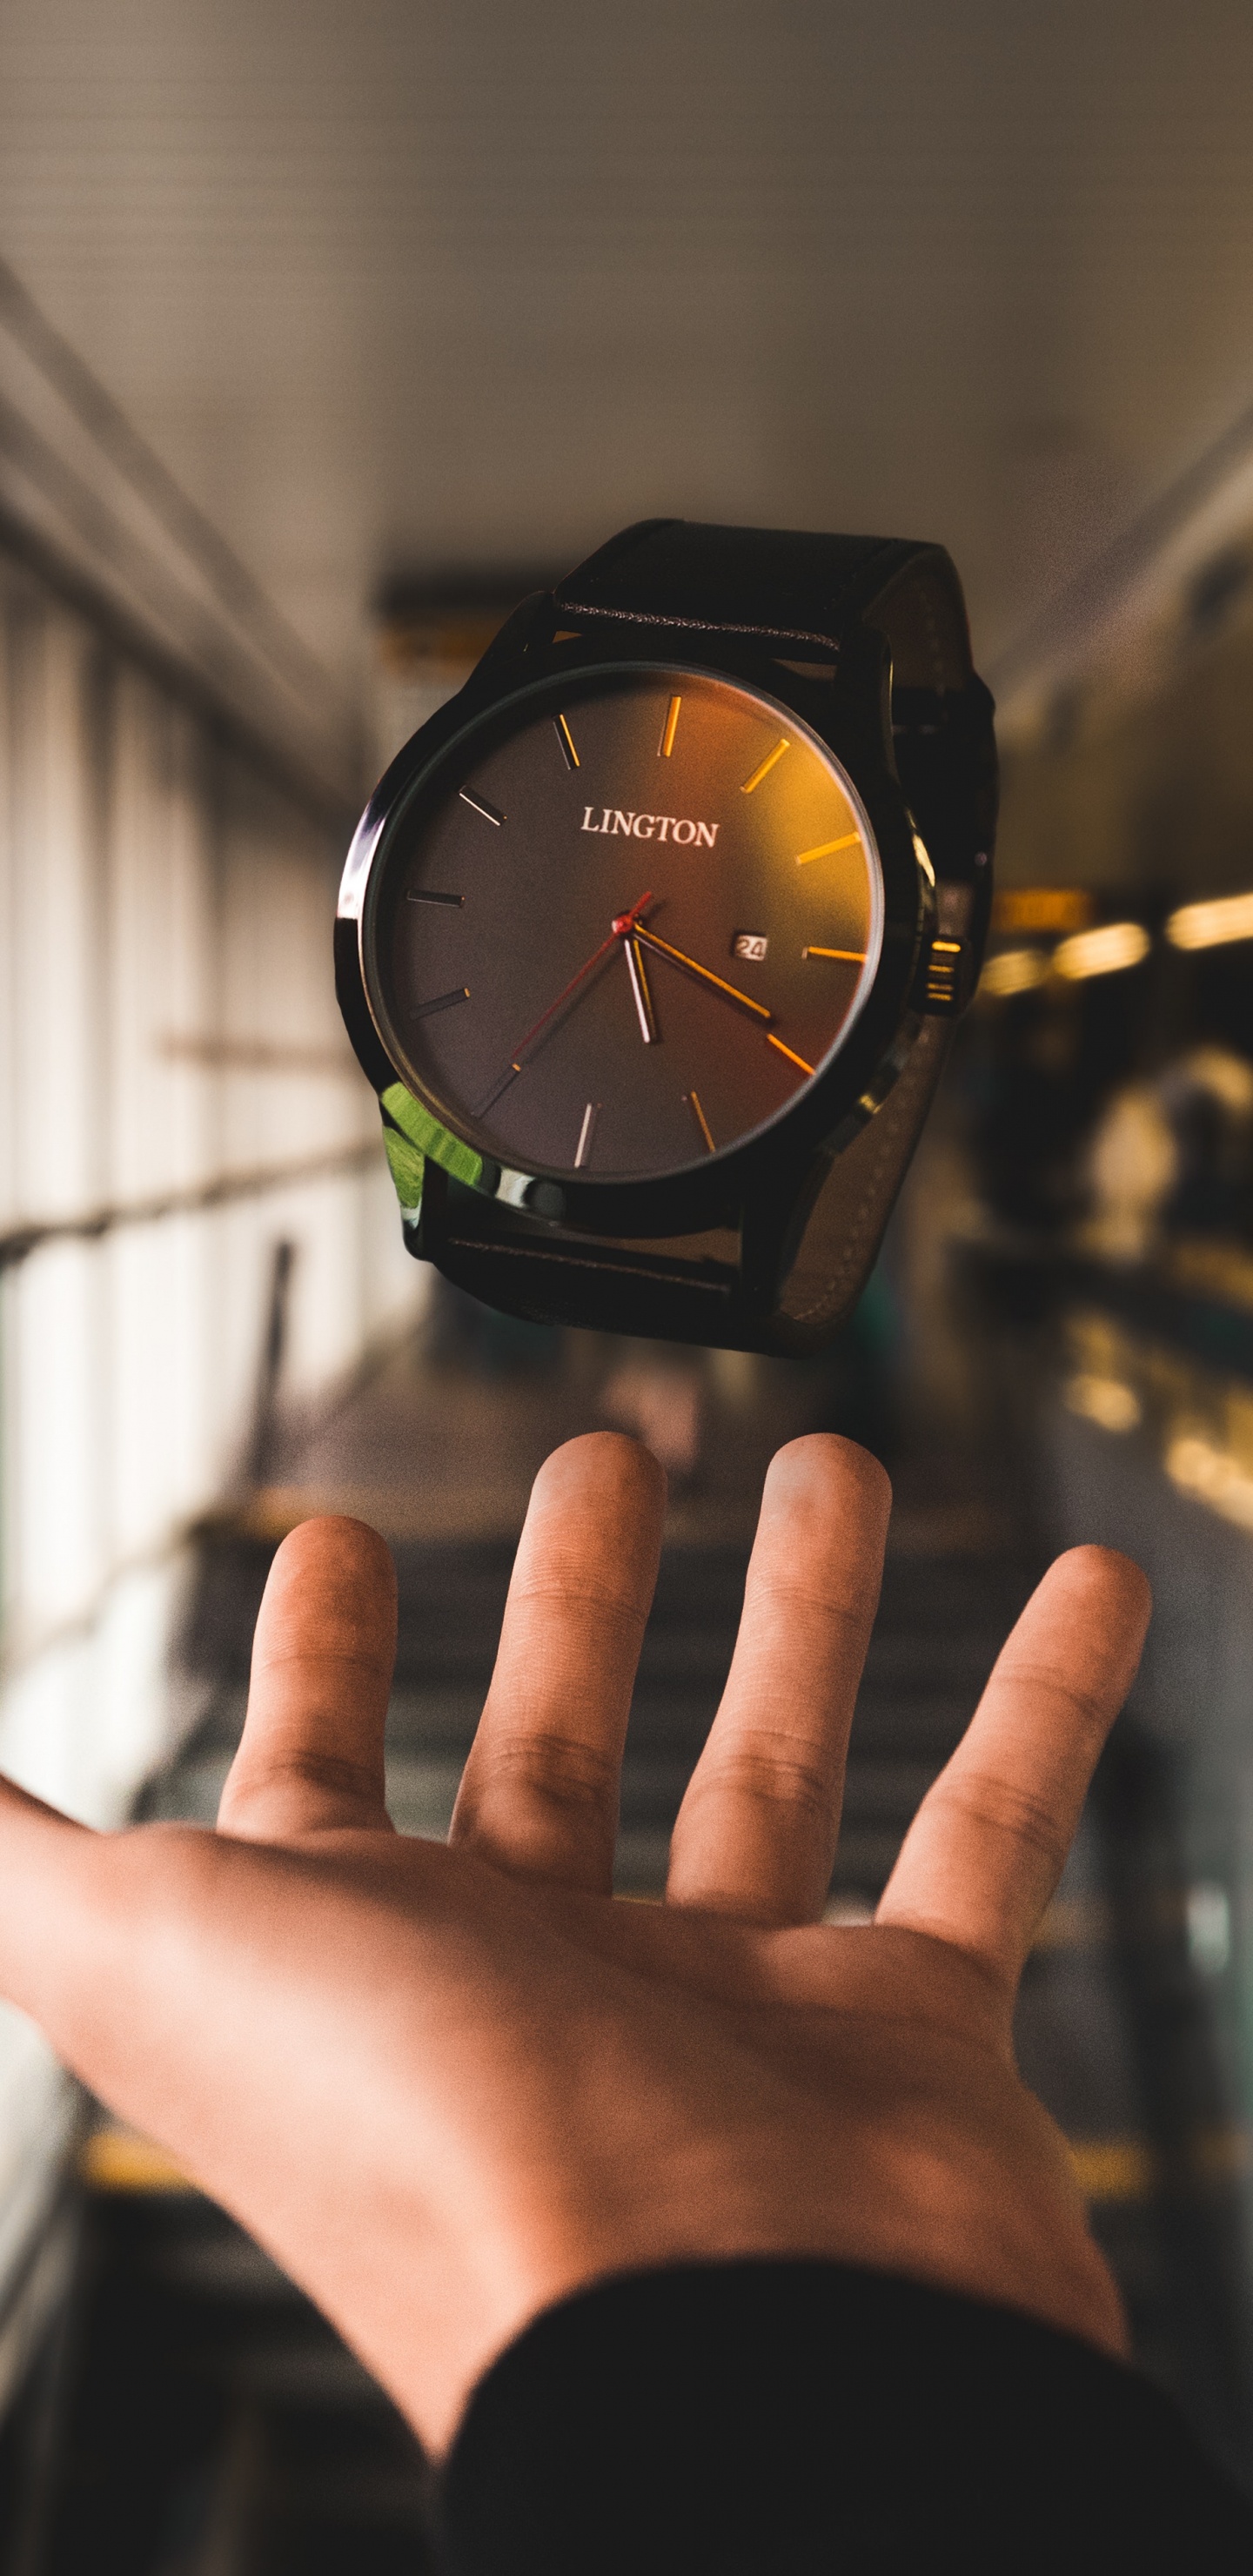 Person Wearing Black and Green Analog Watch. Wallpaper in 1440x2960 Resolution